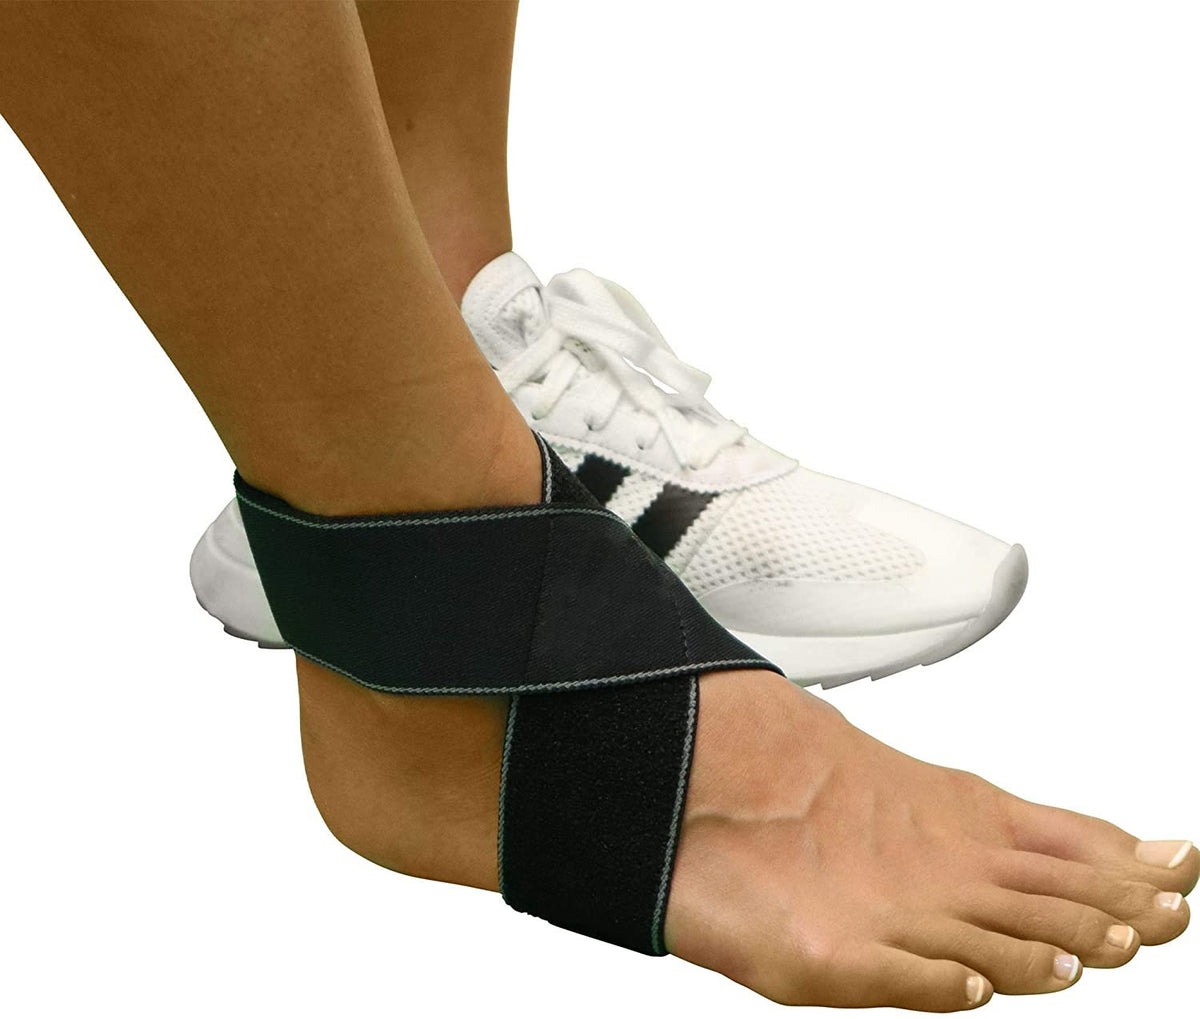 Mars Wellness Achilles Tendonitis Support Ankle Brace - Adjustable Wrap - Comfortable Gel Buttress Pad - All Day Compression Relief - Large/X-Large - Mars Med Supply